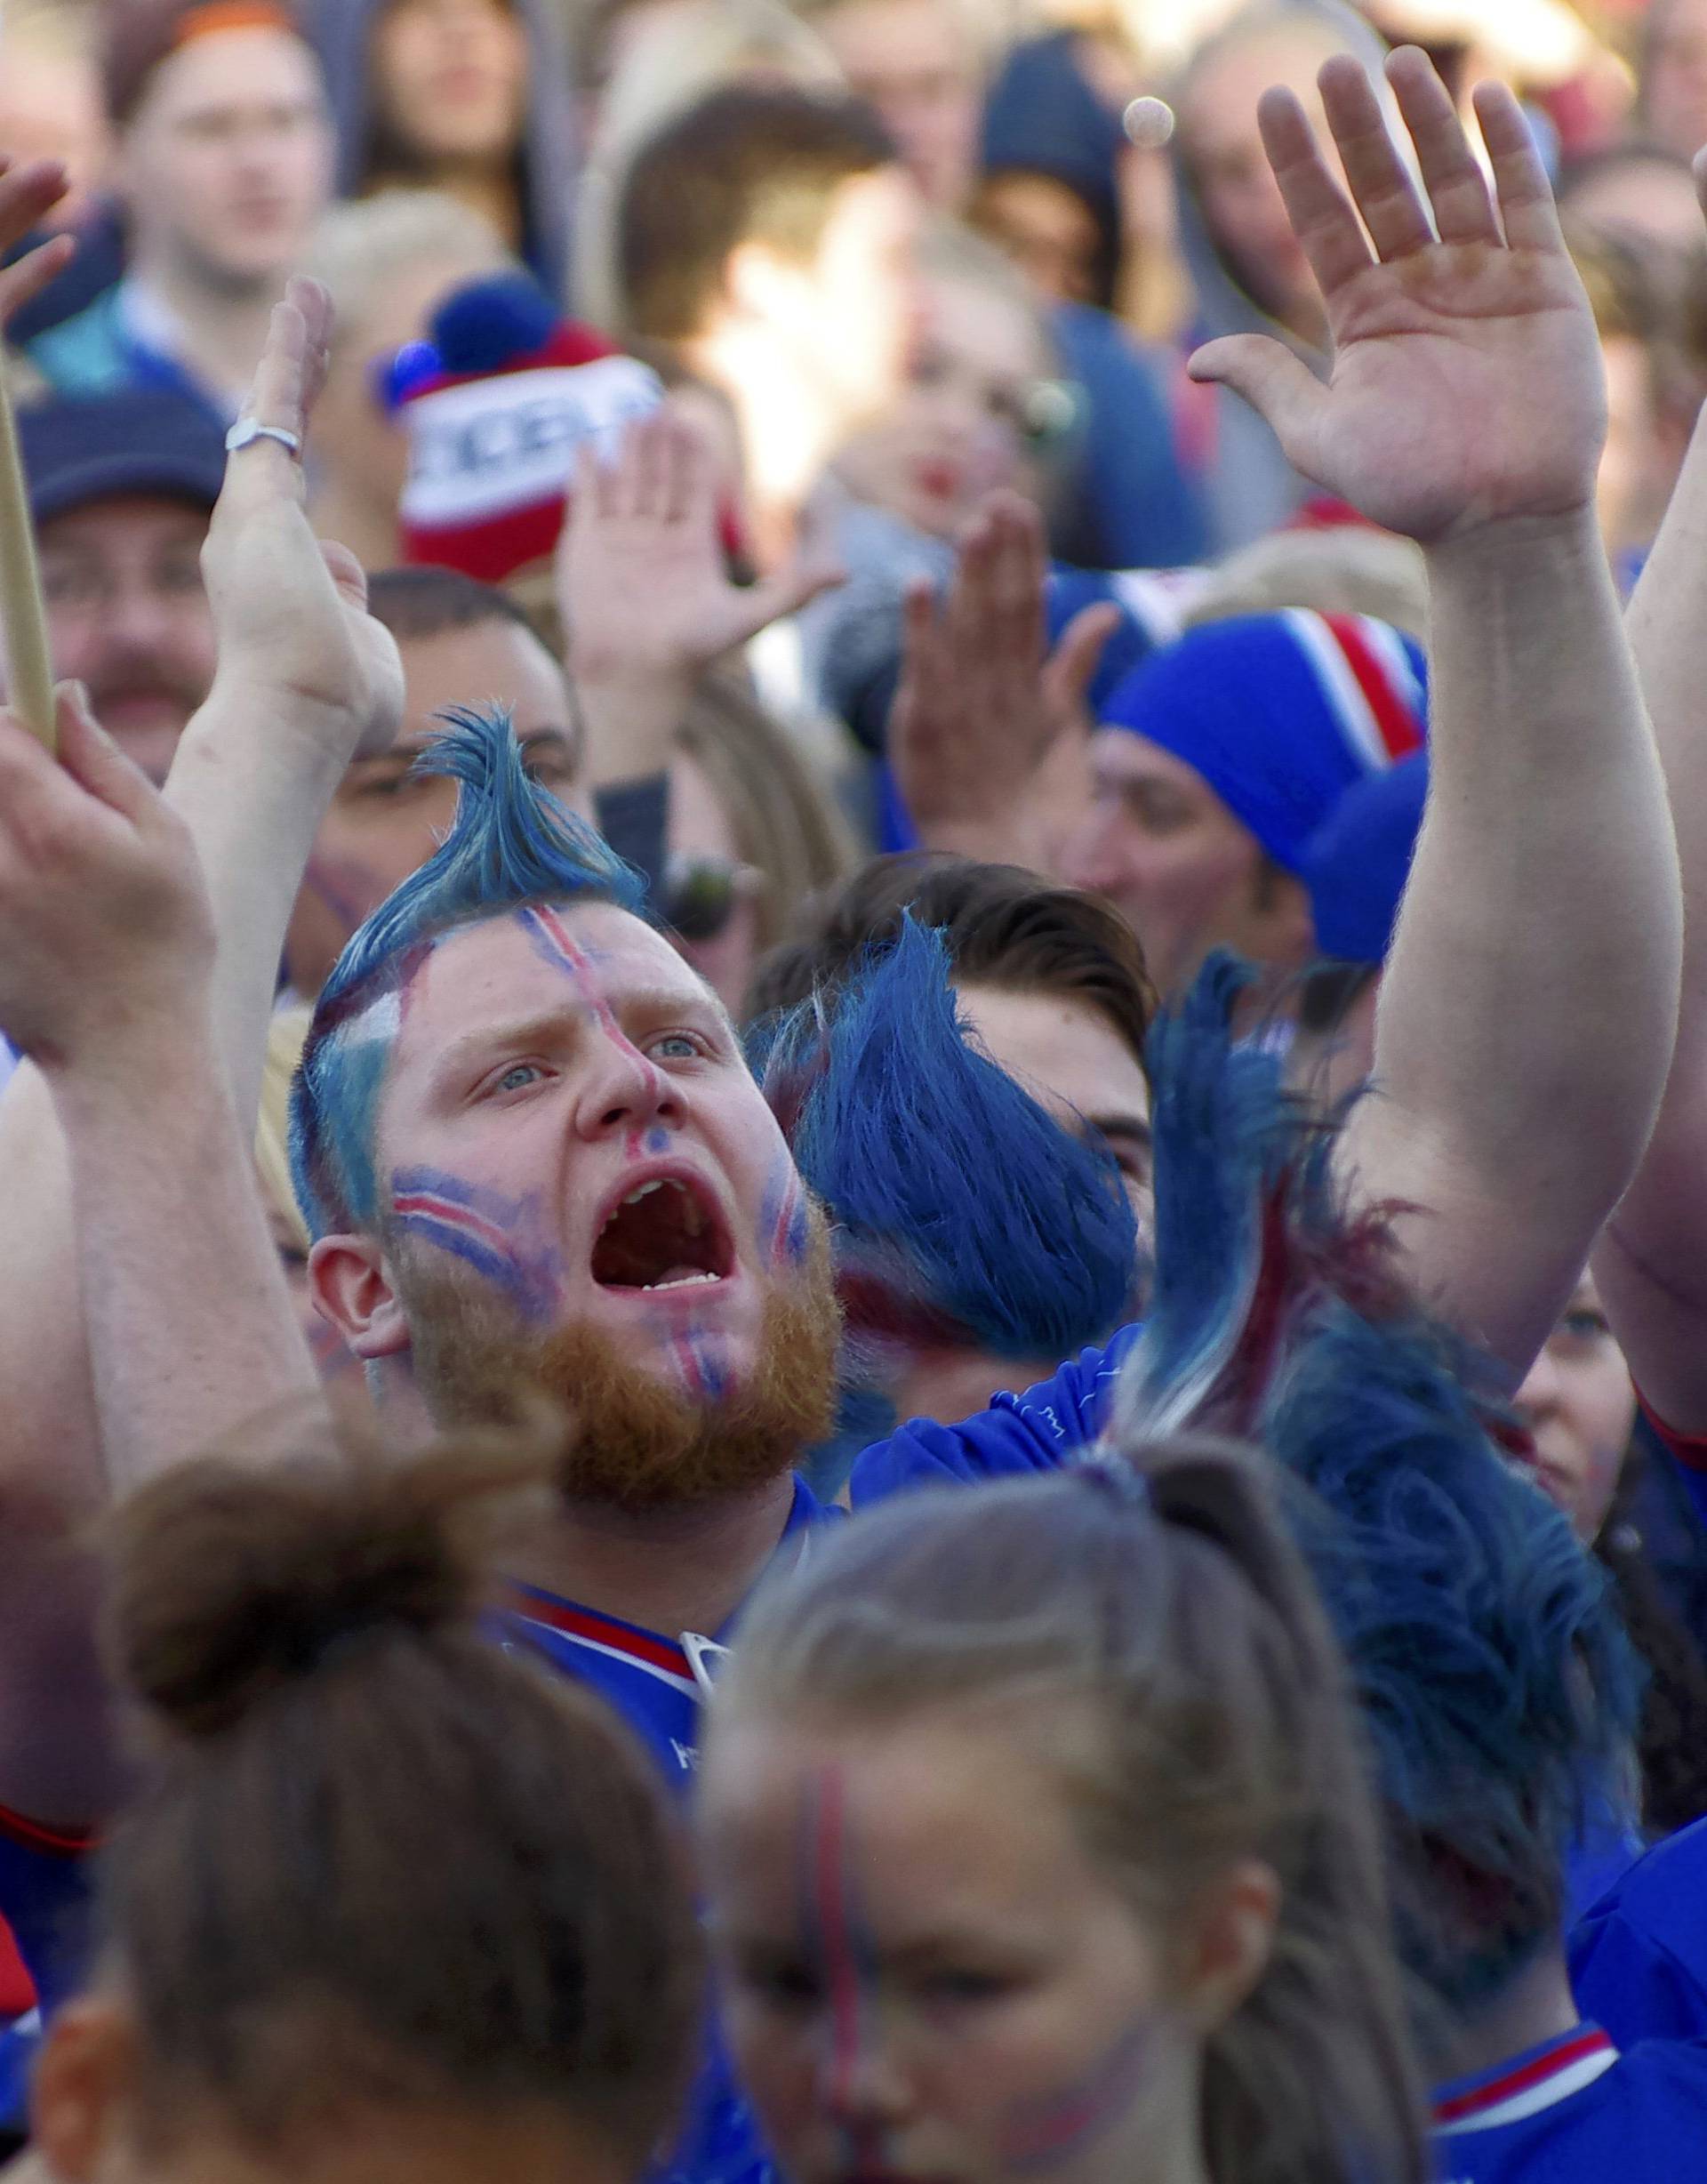 Fans of Iceland react as they watch the Euro 2016 match between Iceland and France in France, at a public screening in Reykjavik